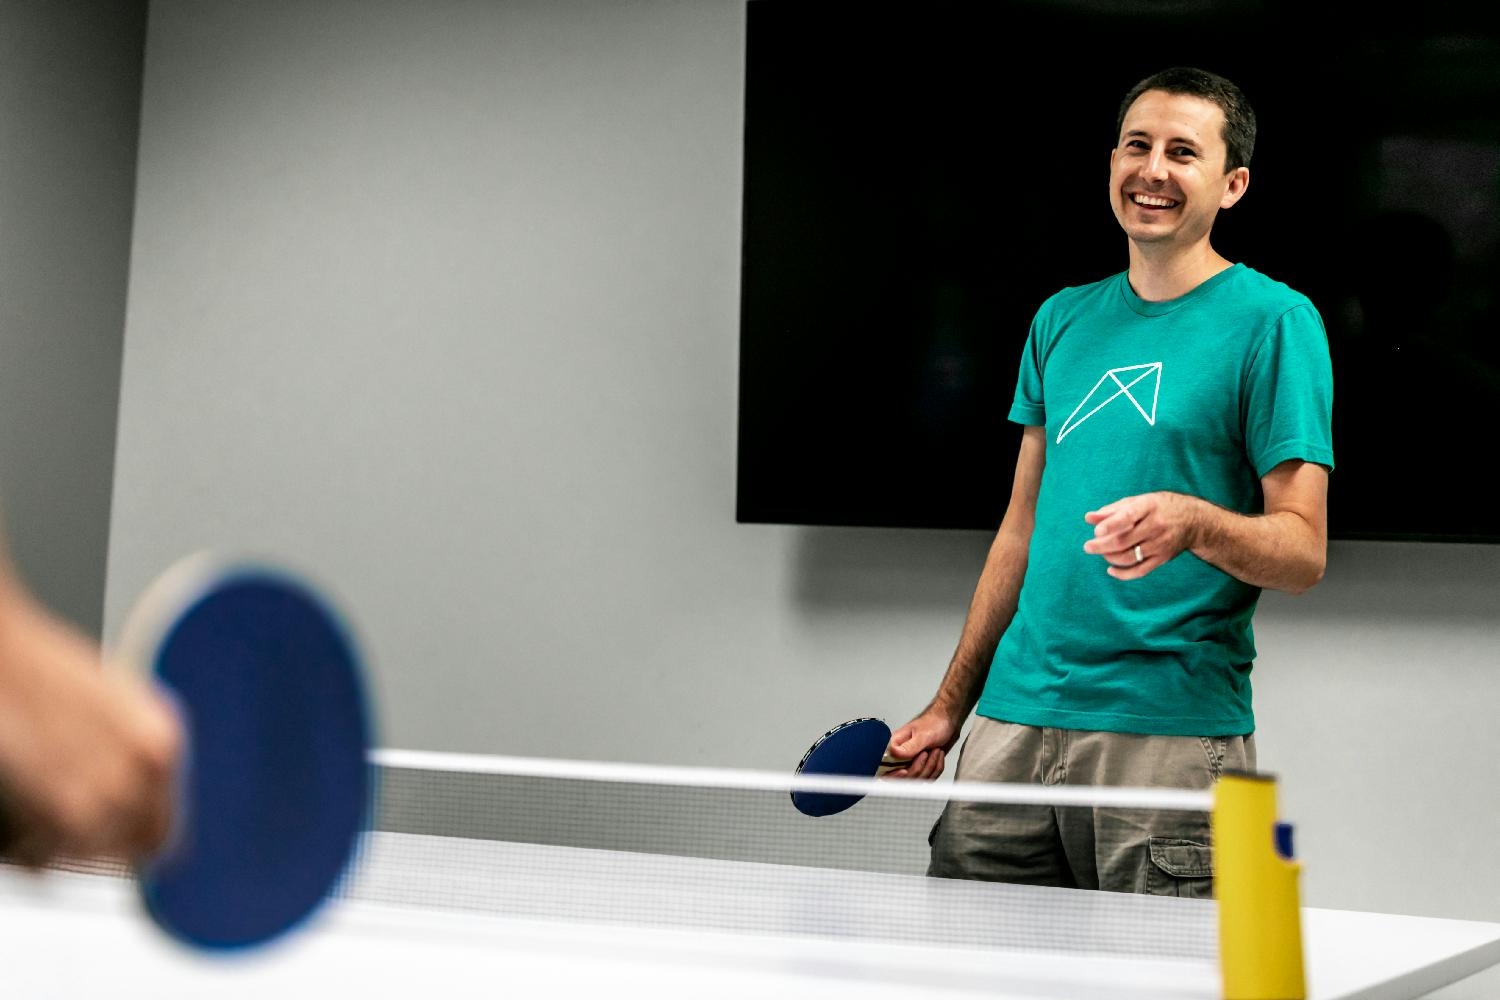 Conference room/ping-pong arena. Brandon, Director of Design and Development, plays a round of pong during Fizzy Friday.